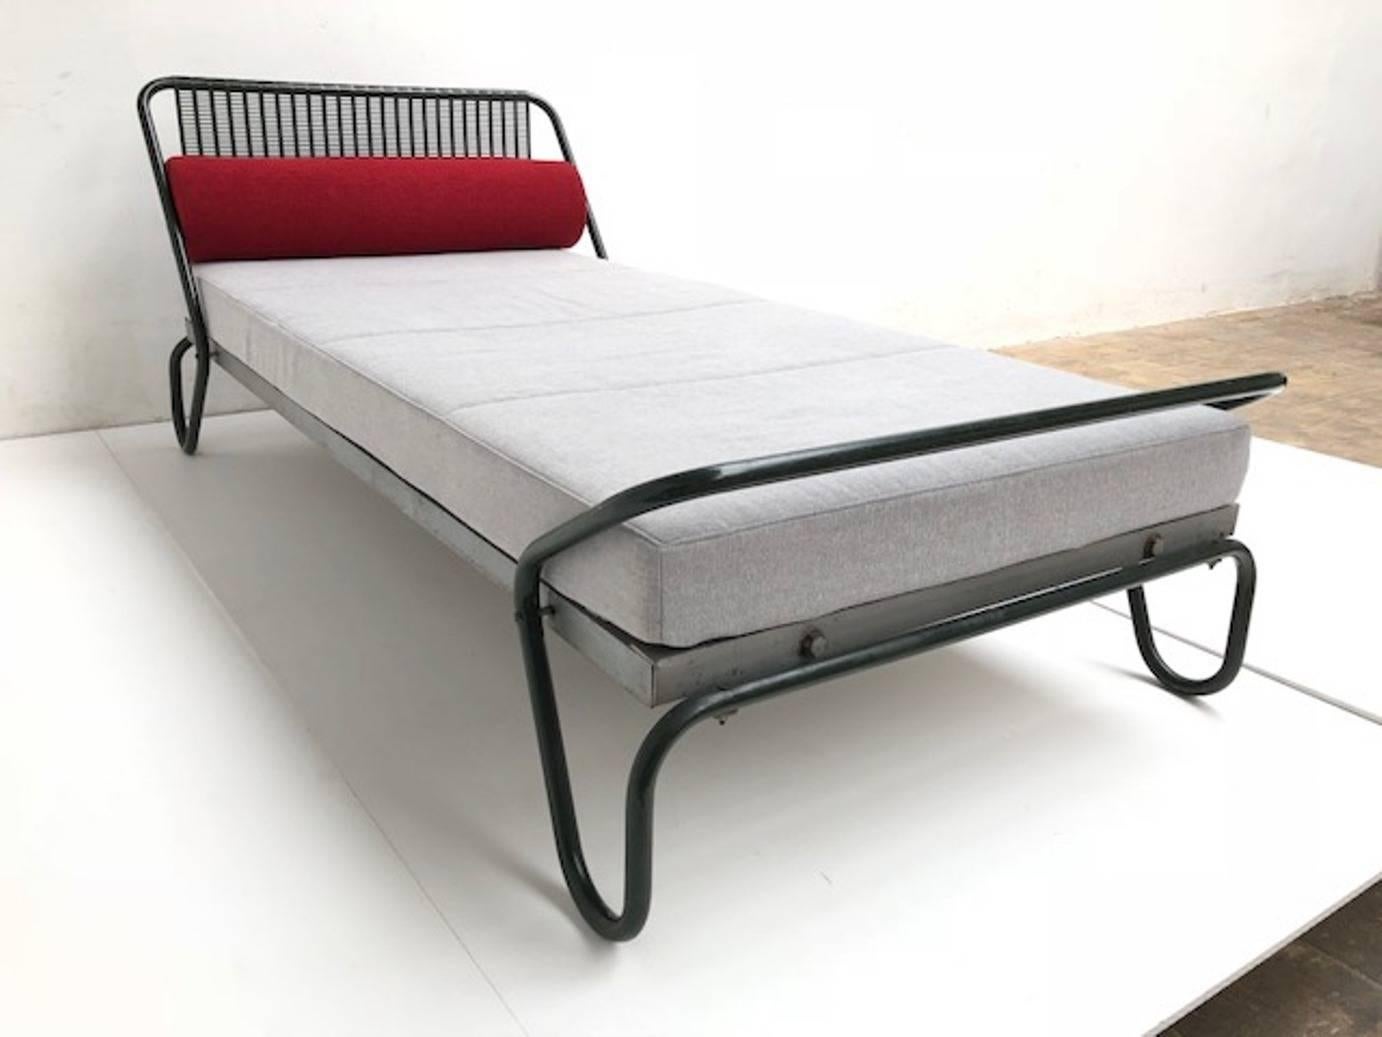 Mid-Century Modern 1952 'Miami' Daybed by Jacques Hitier for the Famous 'Antony' Building, Paris